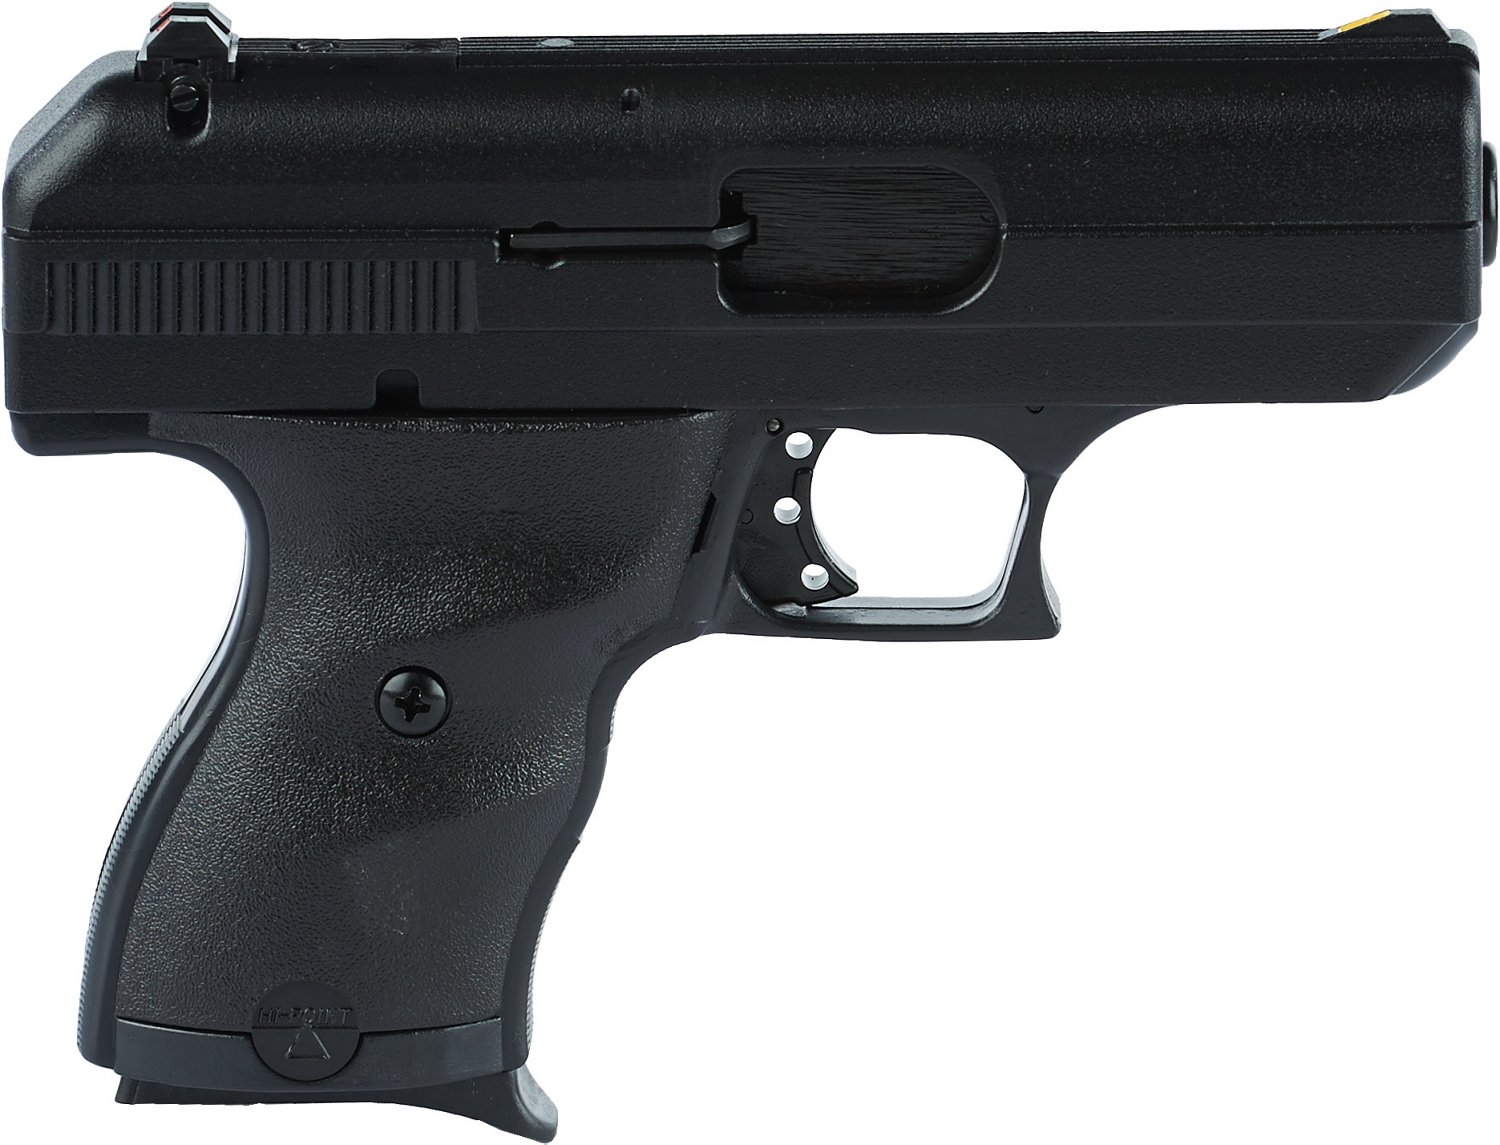 high point 9mm luger